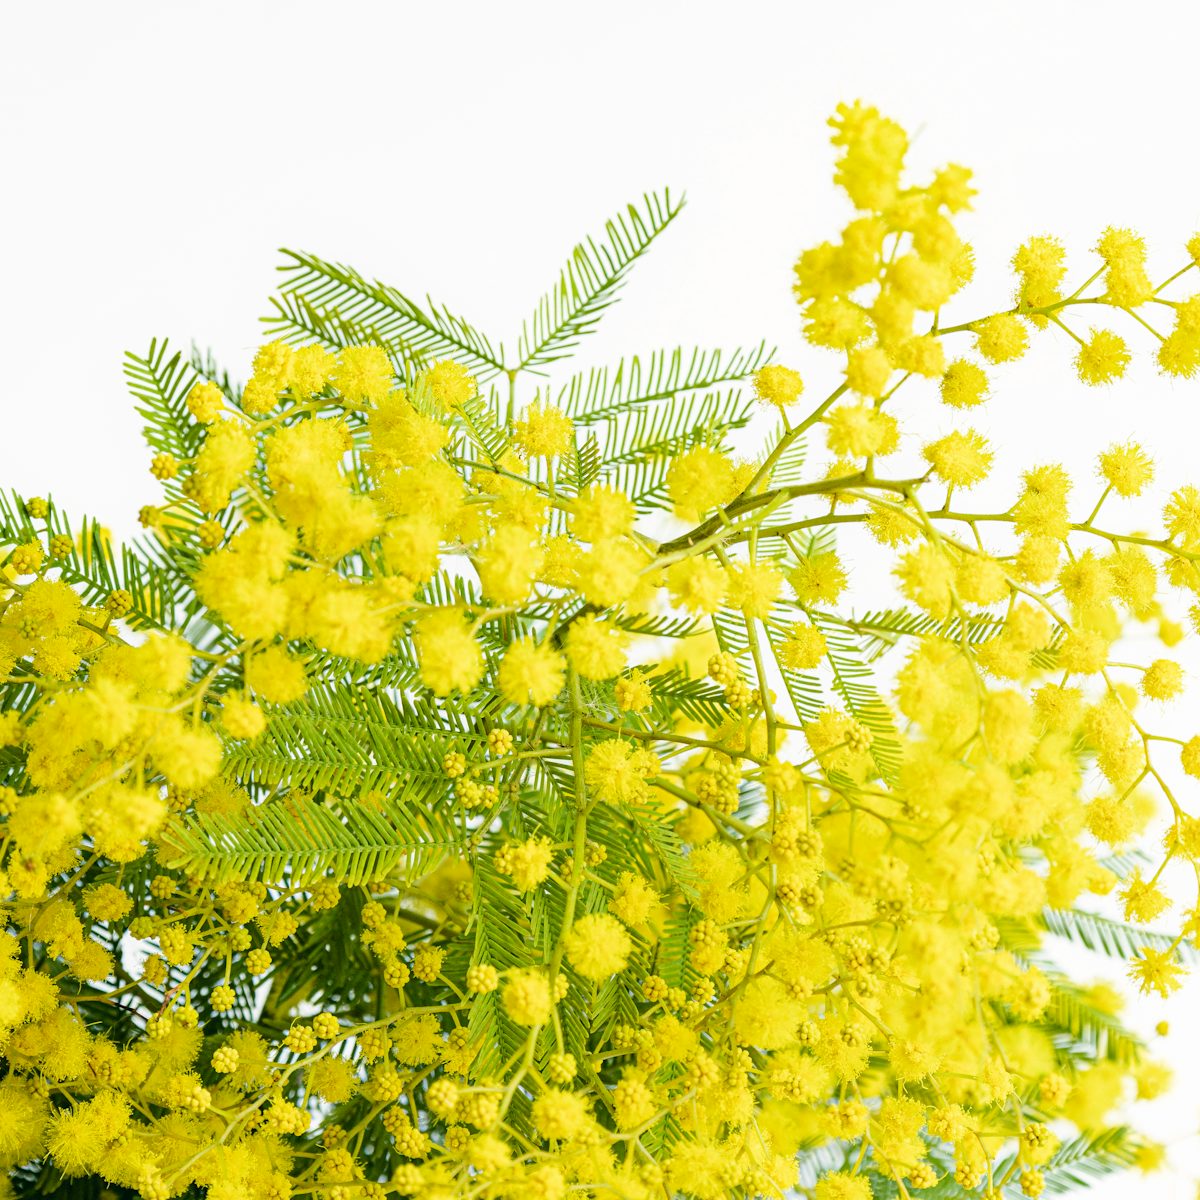 Mimosa Bouquet